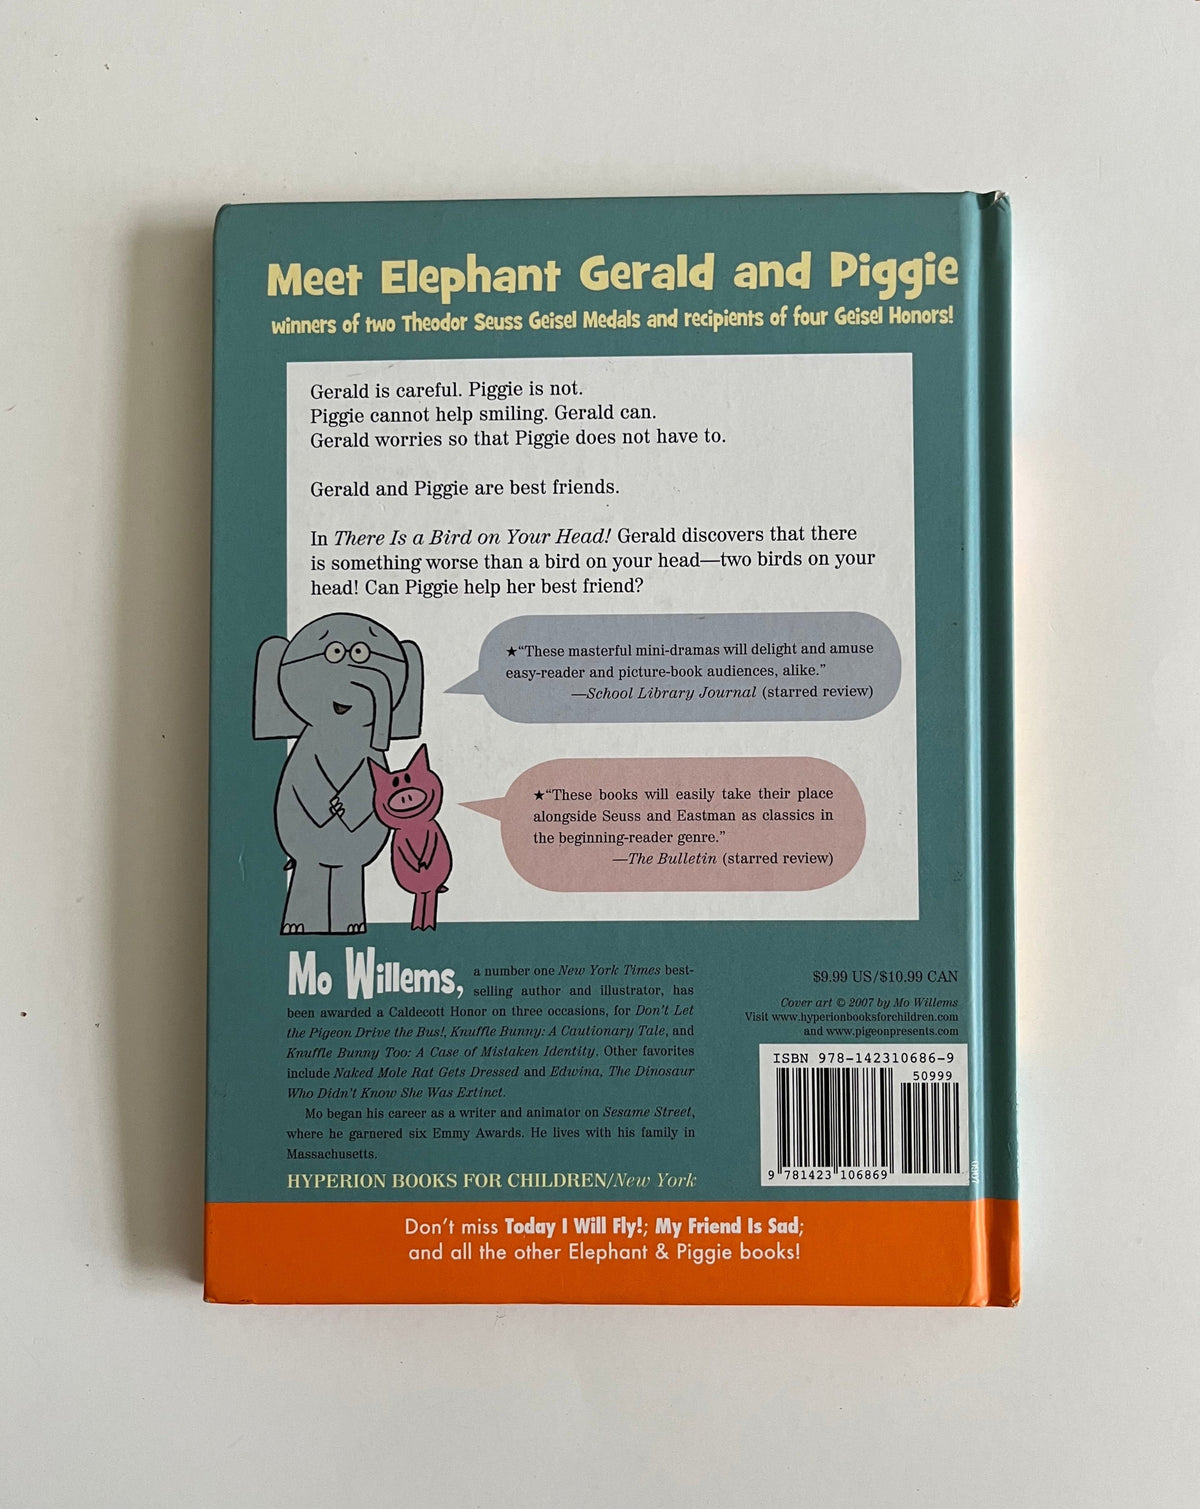 There is a Bird on Your Head by Mo Willems